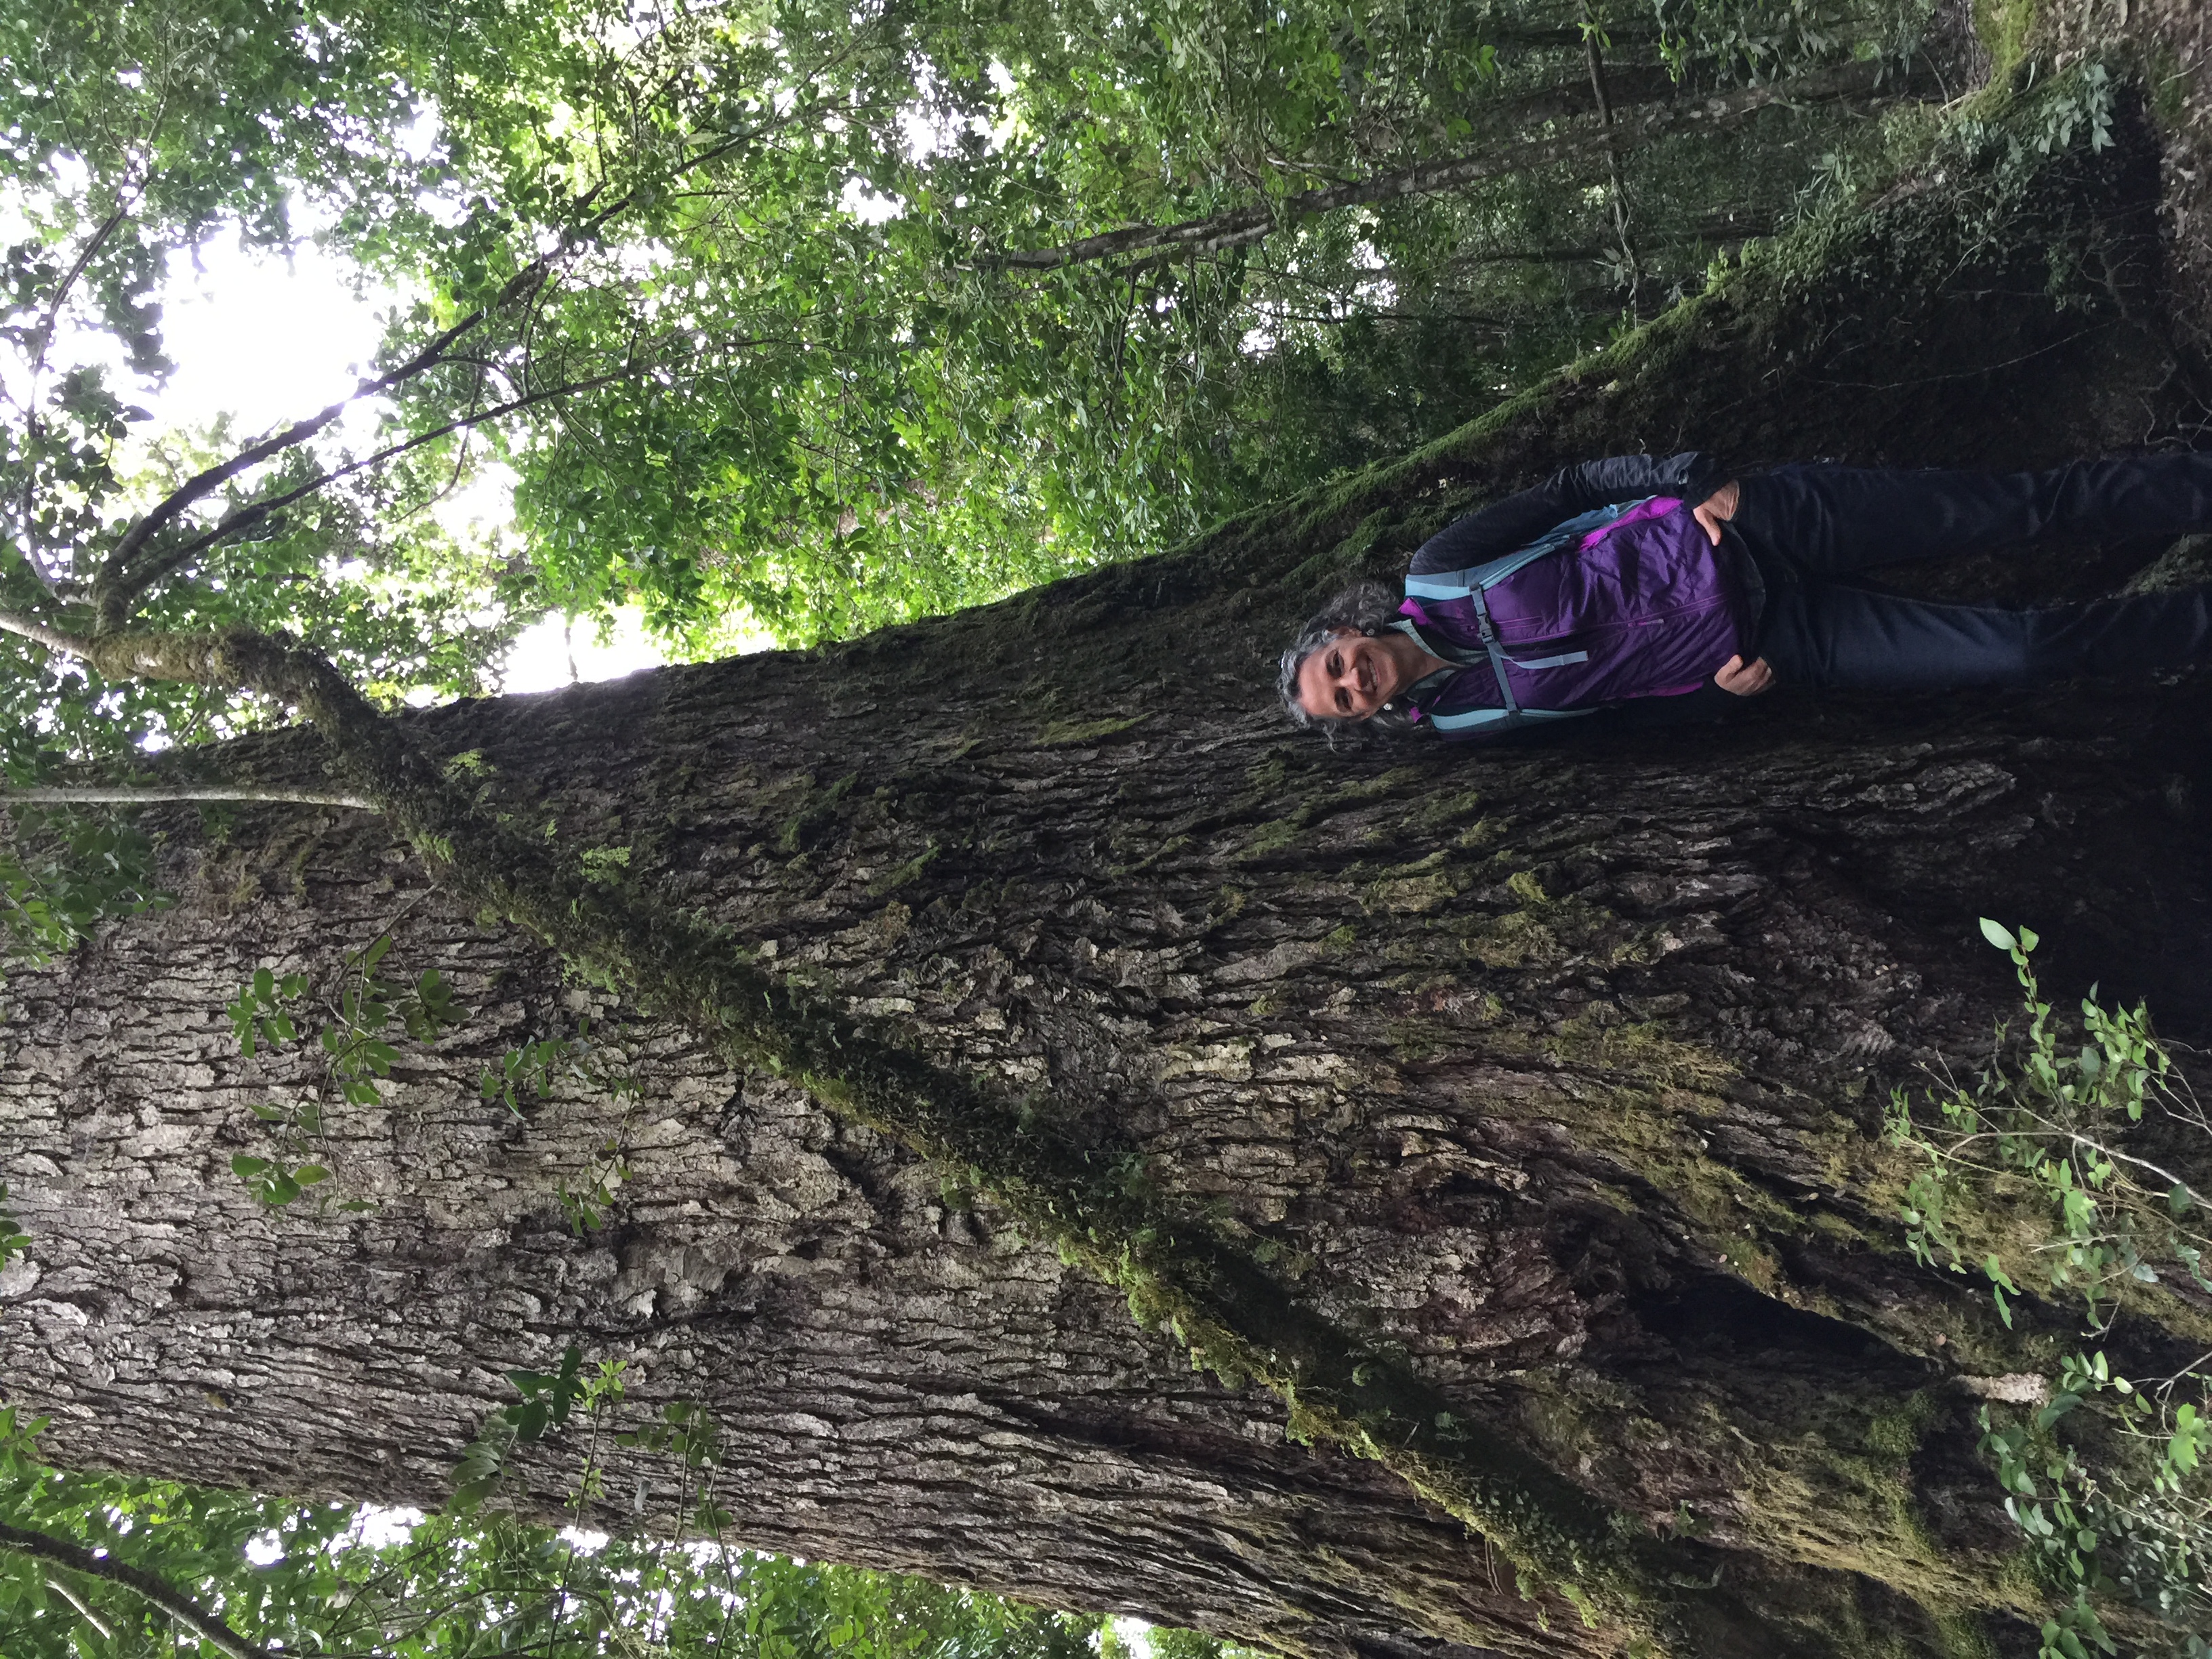 Linda Nagel and a Nothofagus tree on a field tour as part of an International Union of Forest Resource Organizations uneven-aged silviculture meeting in Valdivia, Chile.